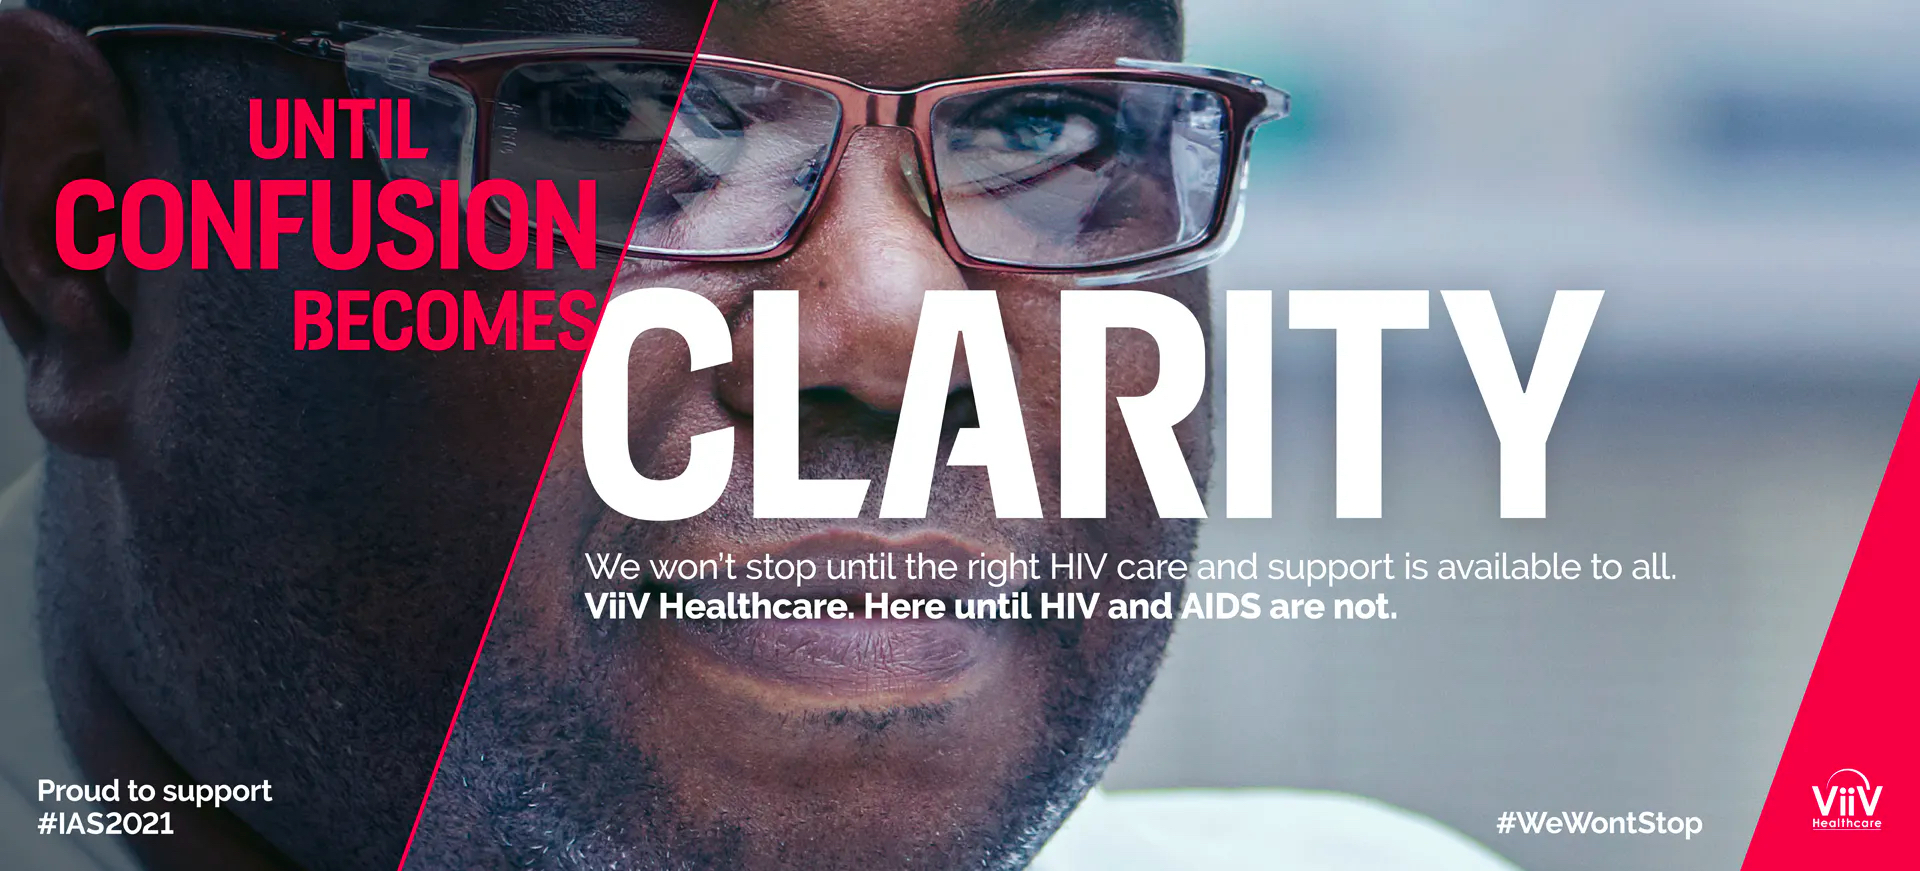 Black man facing the camera overlaid by ViiV’s WeWontStop messaging: Until confusion becomes clarity